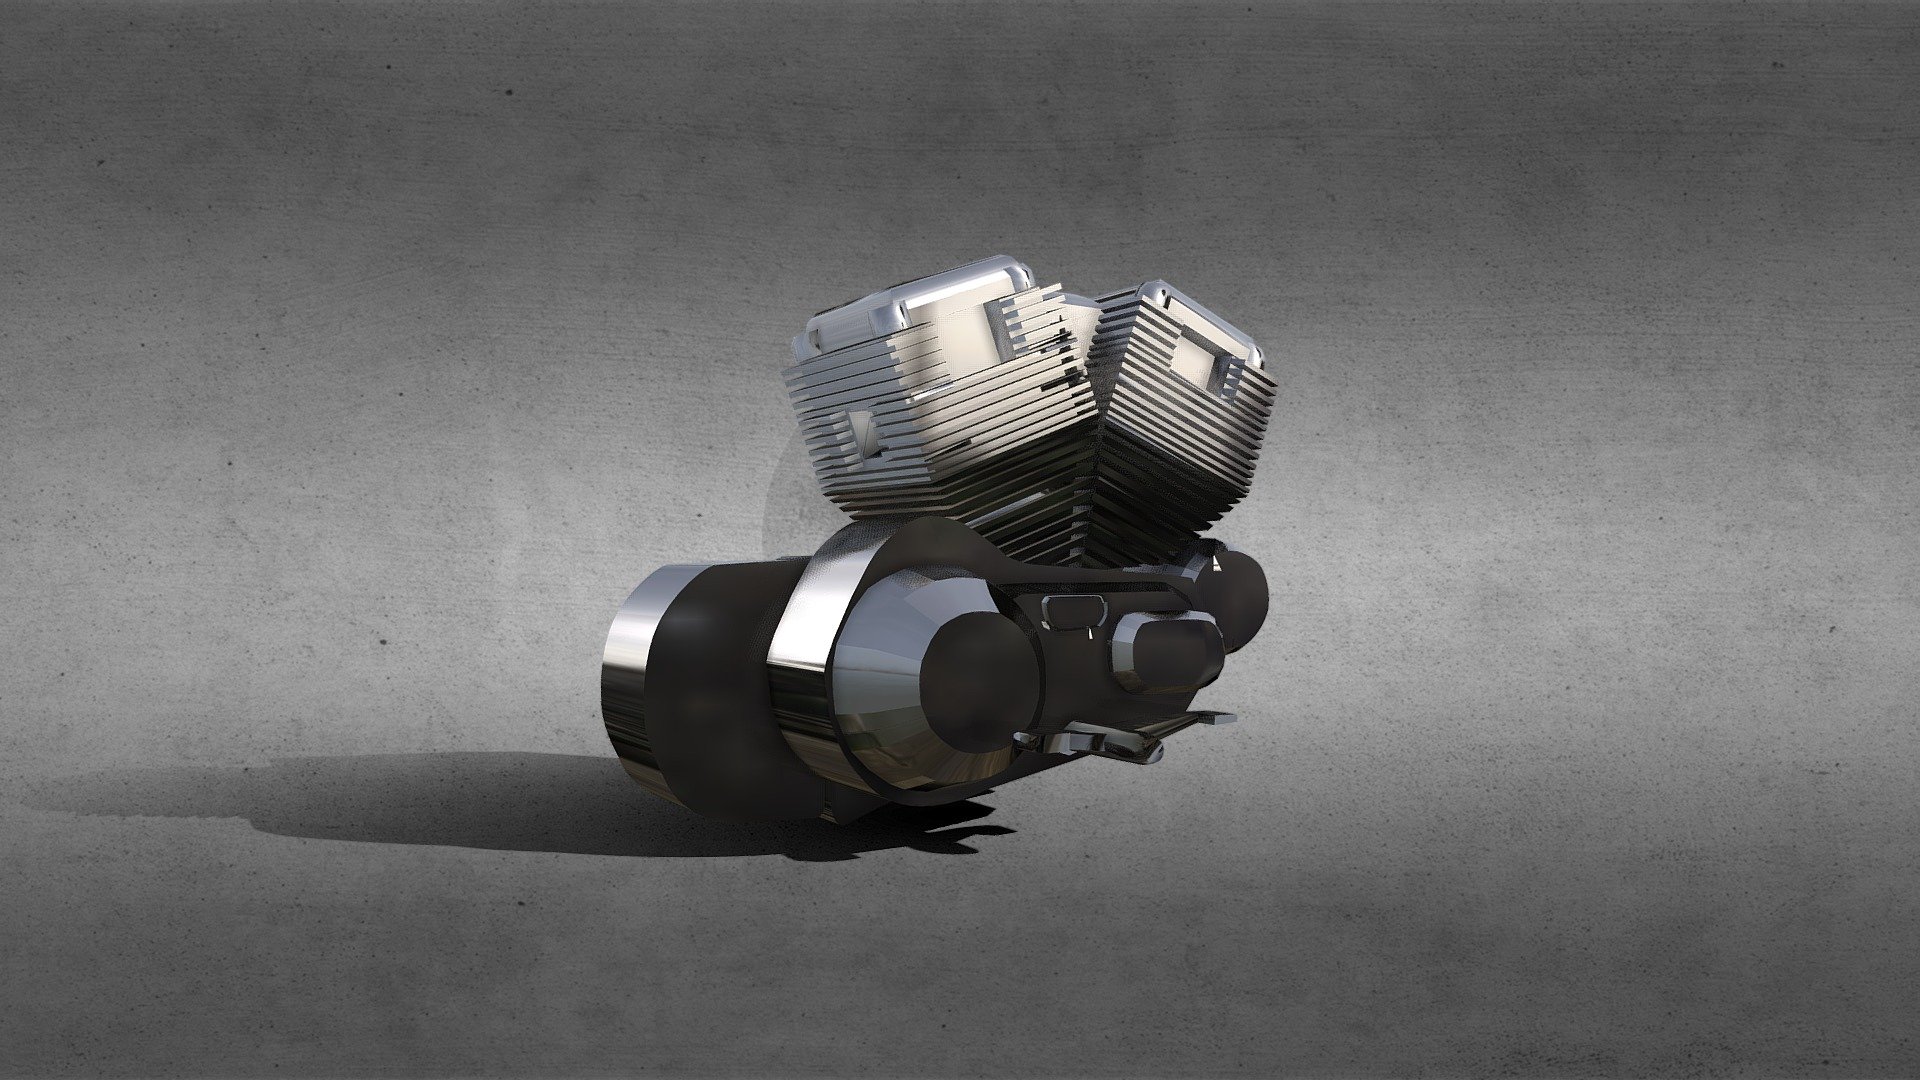 Hurrayyy🥳 it’s me stupids !!!

I bring this model to present you the 3D model of the Engine of the motorbike.

Hope you found this model usefull

Enjoy free 3D models!!!!!!!!!!!

ROY - Bike Engine - Download Free 3D model by ROY (@roy.3dartist) 3d model